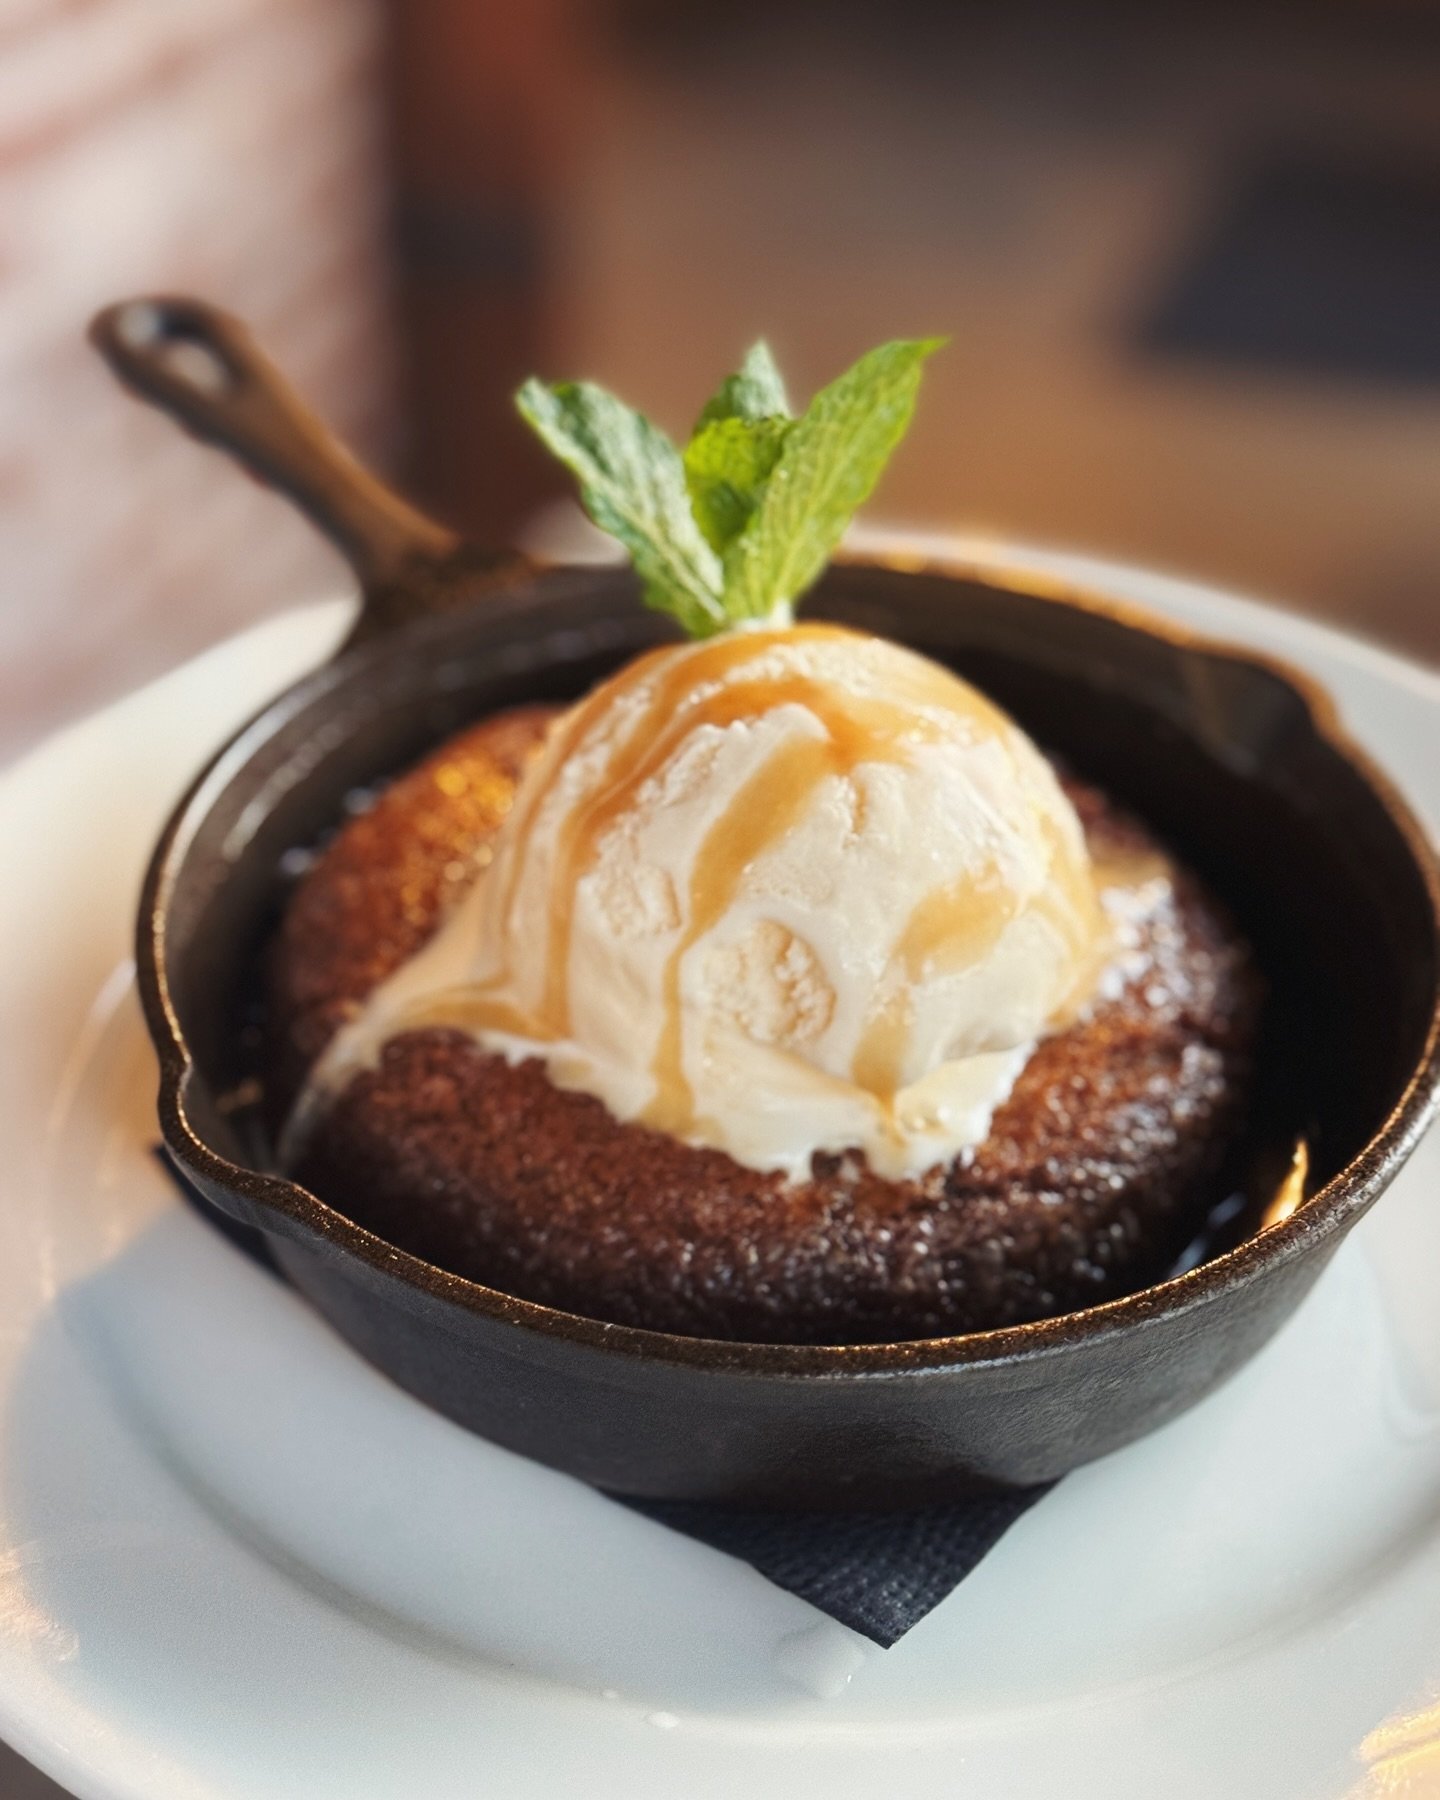 Our skillet cookie is pretty dang close to perfect. Warm chewy cookie, melty chocolate, bourbon caramel and vanilla ice cream to tie it all together. Available nightly ✨